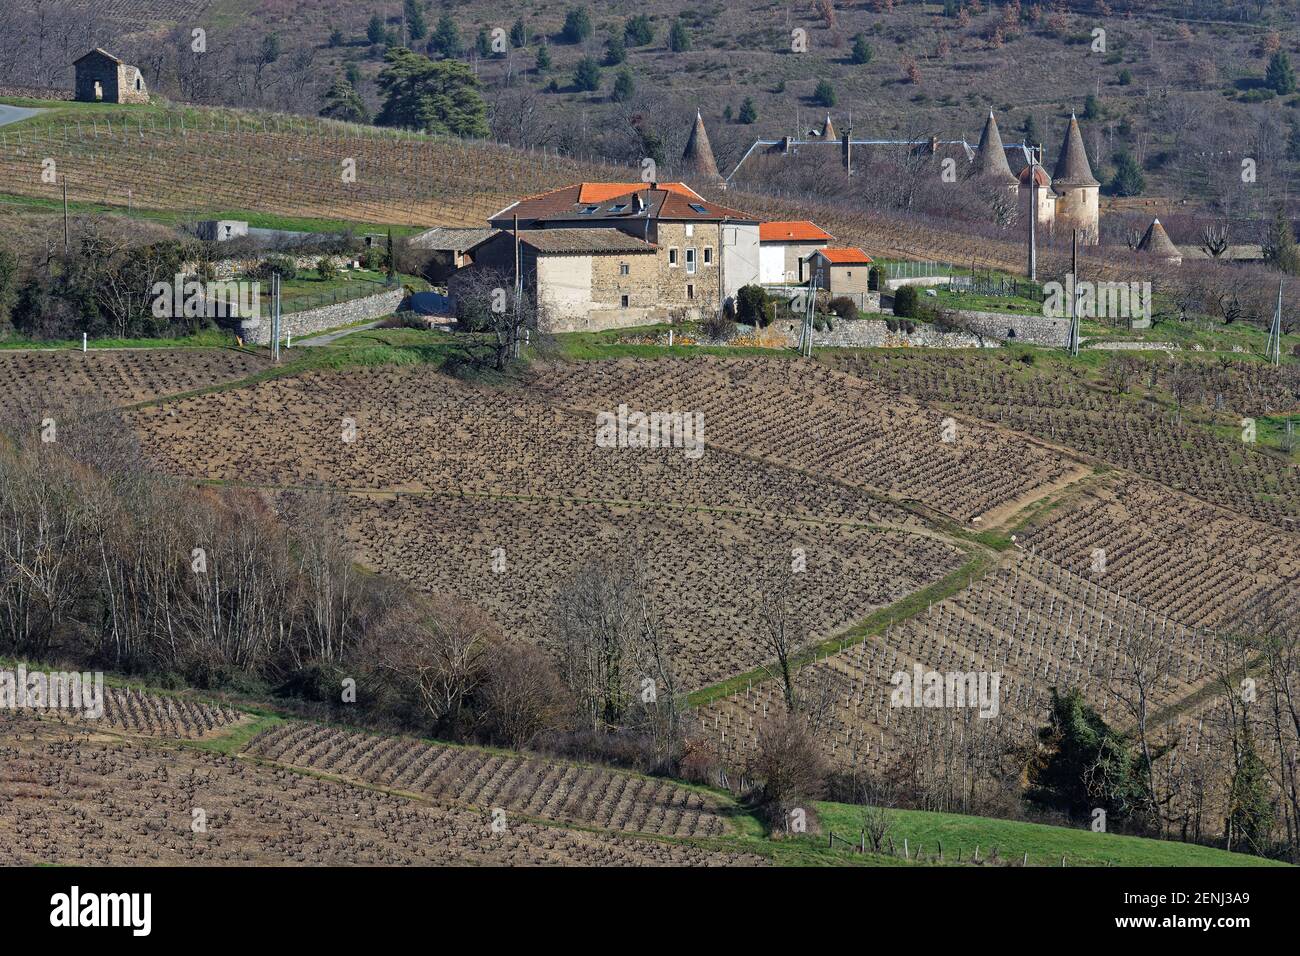 A vineyard landscape in the hills of Beaujolais Stock Photo